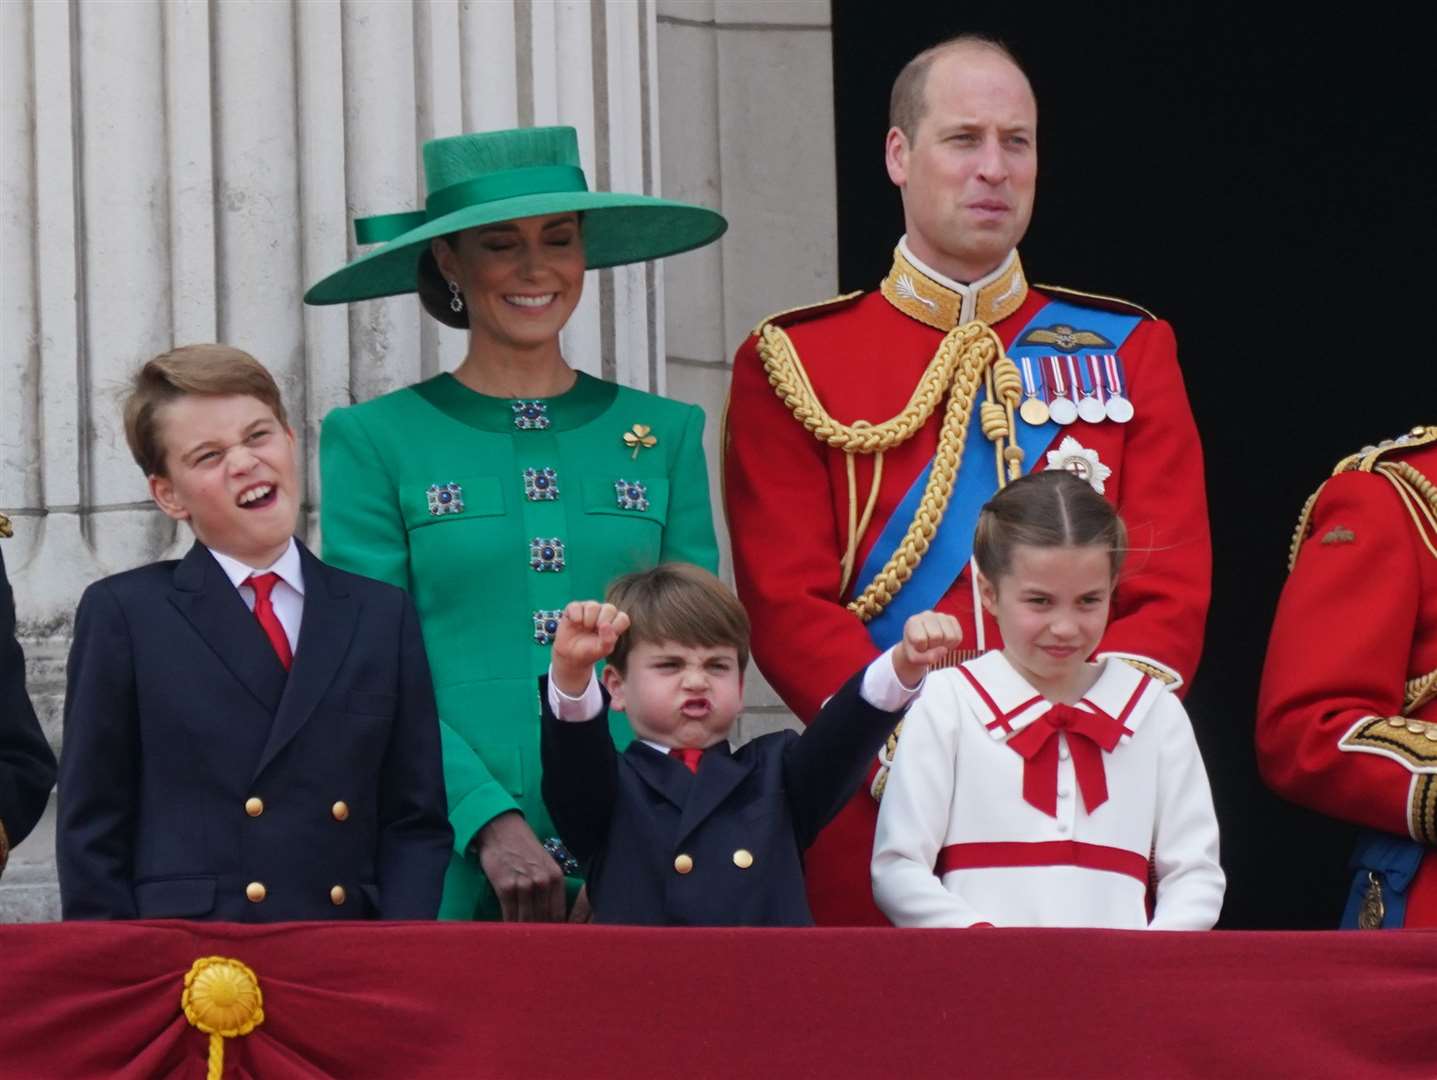 (left to right) Prince George, the Princess of Wales, Prince Louis, the Prince of Wales and Princess Charlotte appeared on the balcony of Buckingham Palace to view the flypast after the Trooping the Colour ceremony in June (Yui Mok/PA)